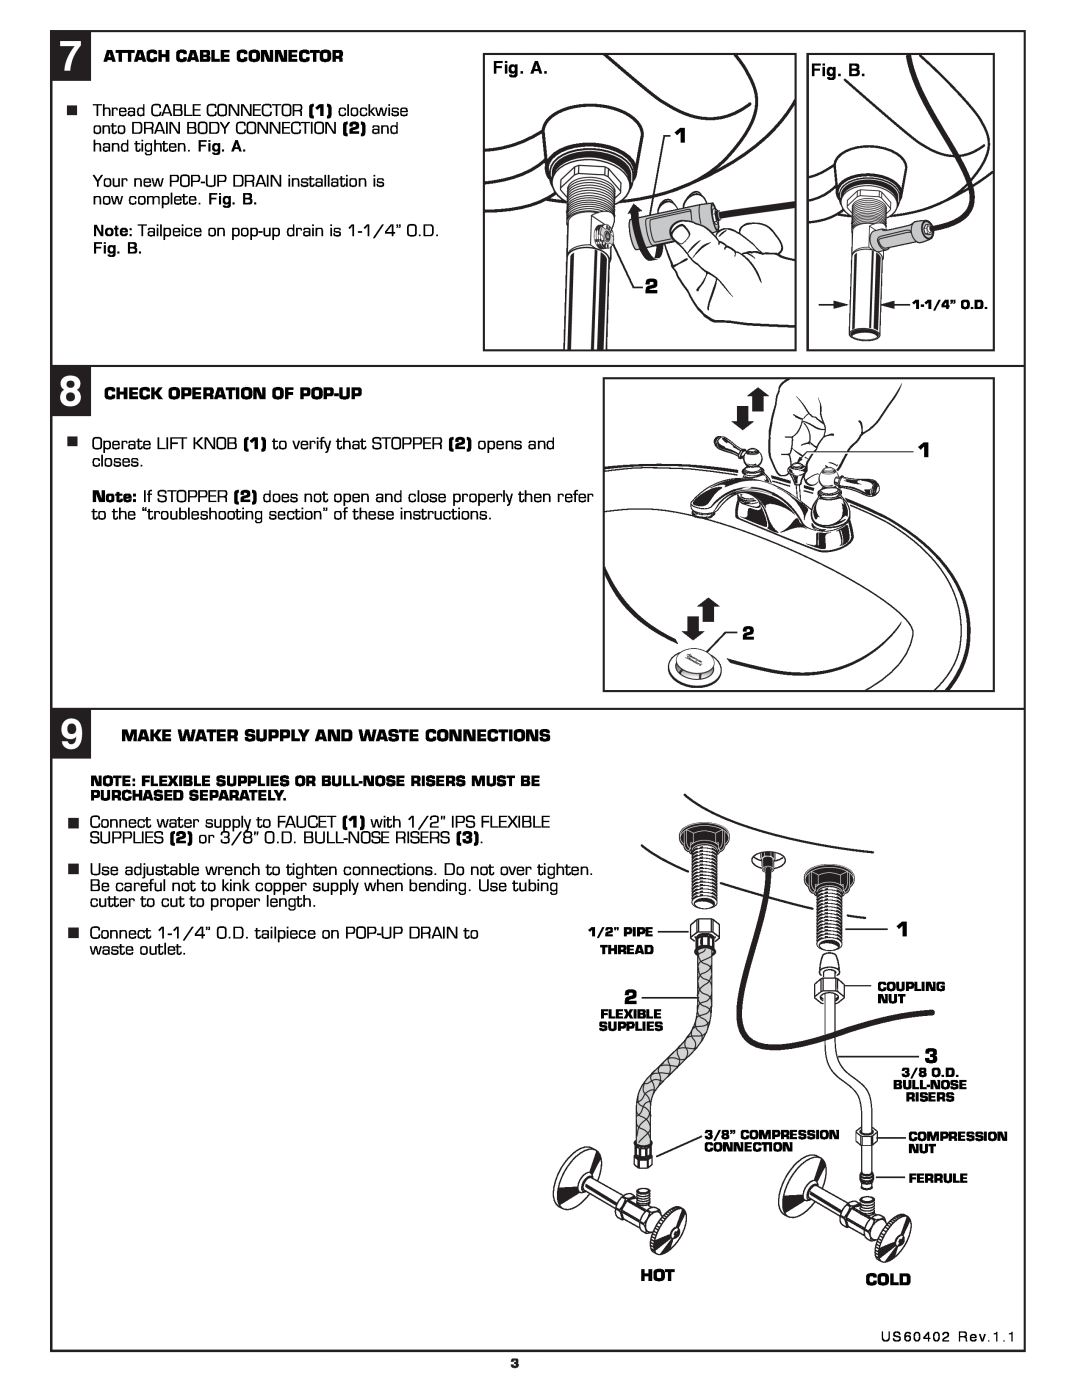 American Standard 7411.712, 7411.732, 7411.722 Fig. A, Fig. B, Attach Cable Connector, Check Operation Of Pop-Up, Hotcold 